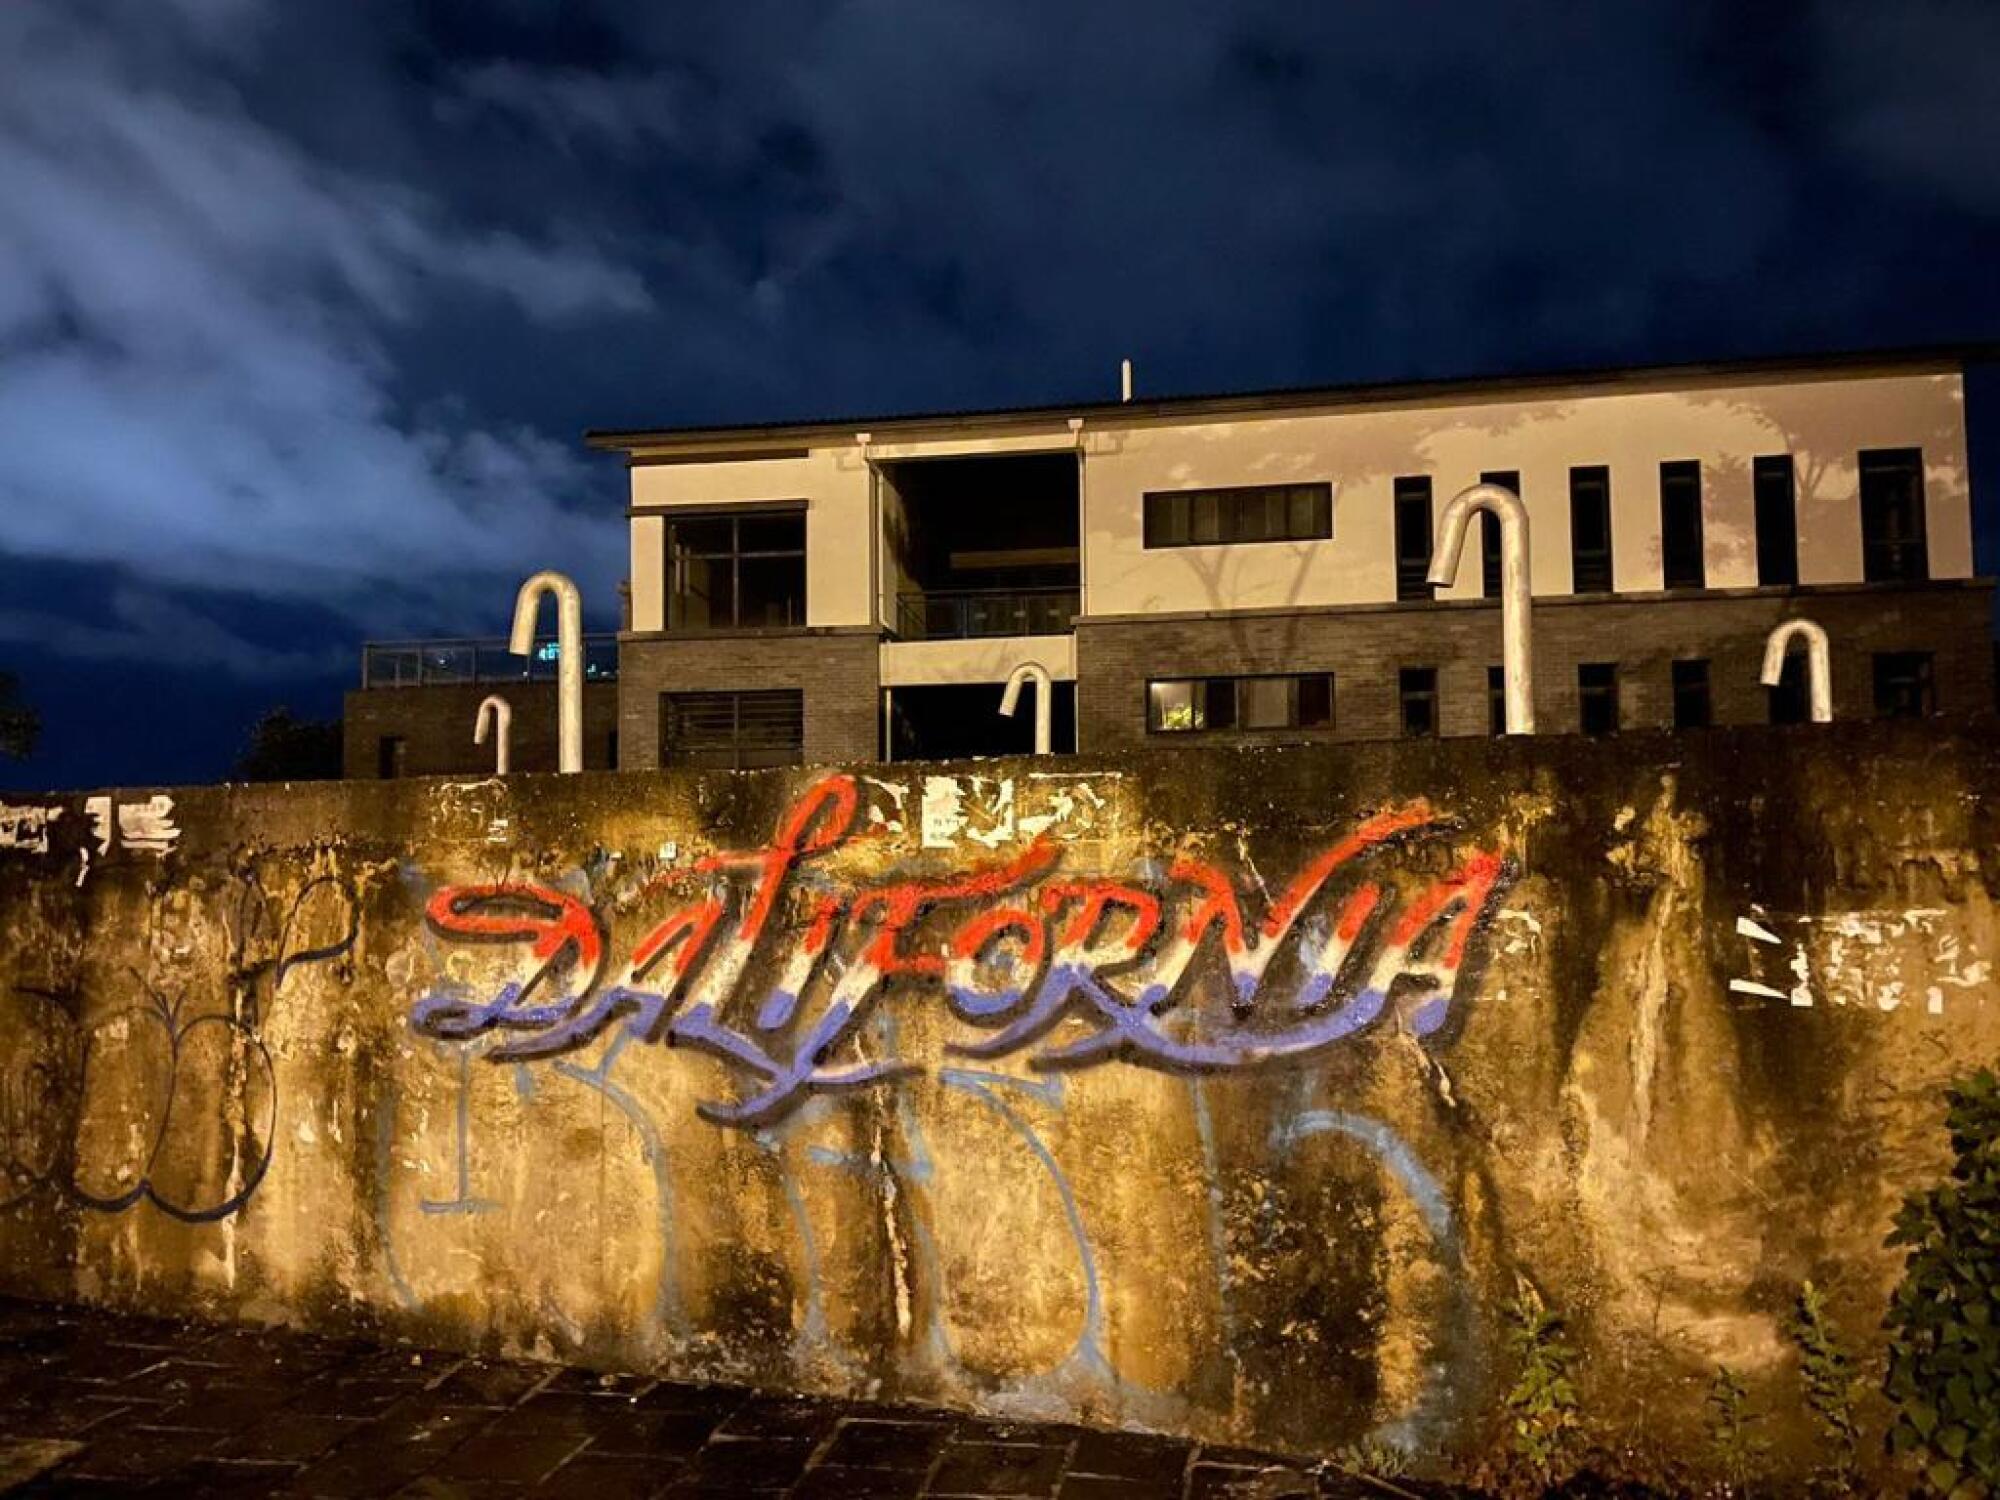 Graffiti painting of the word "Dalifornia" on a dirty wall.